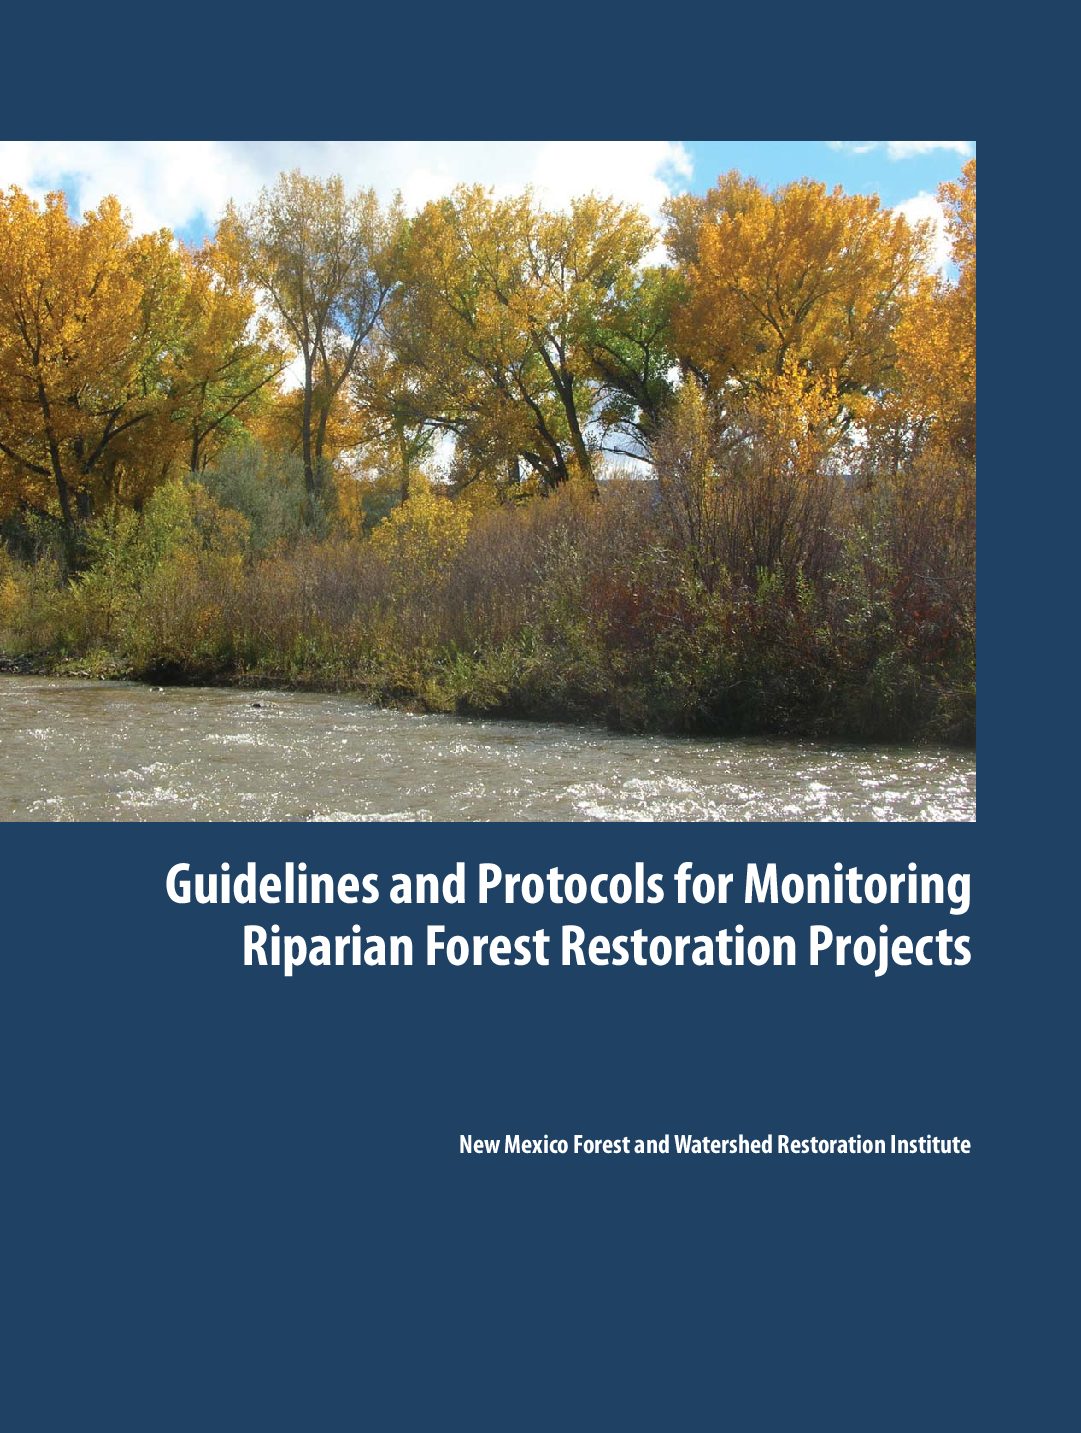 Guidelines and Protocols for Monitoring Riparian Forest Restoration Projects